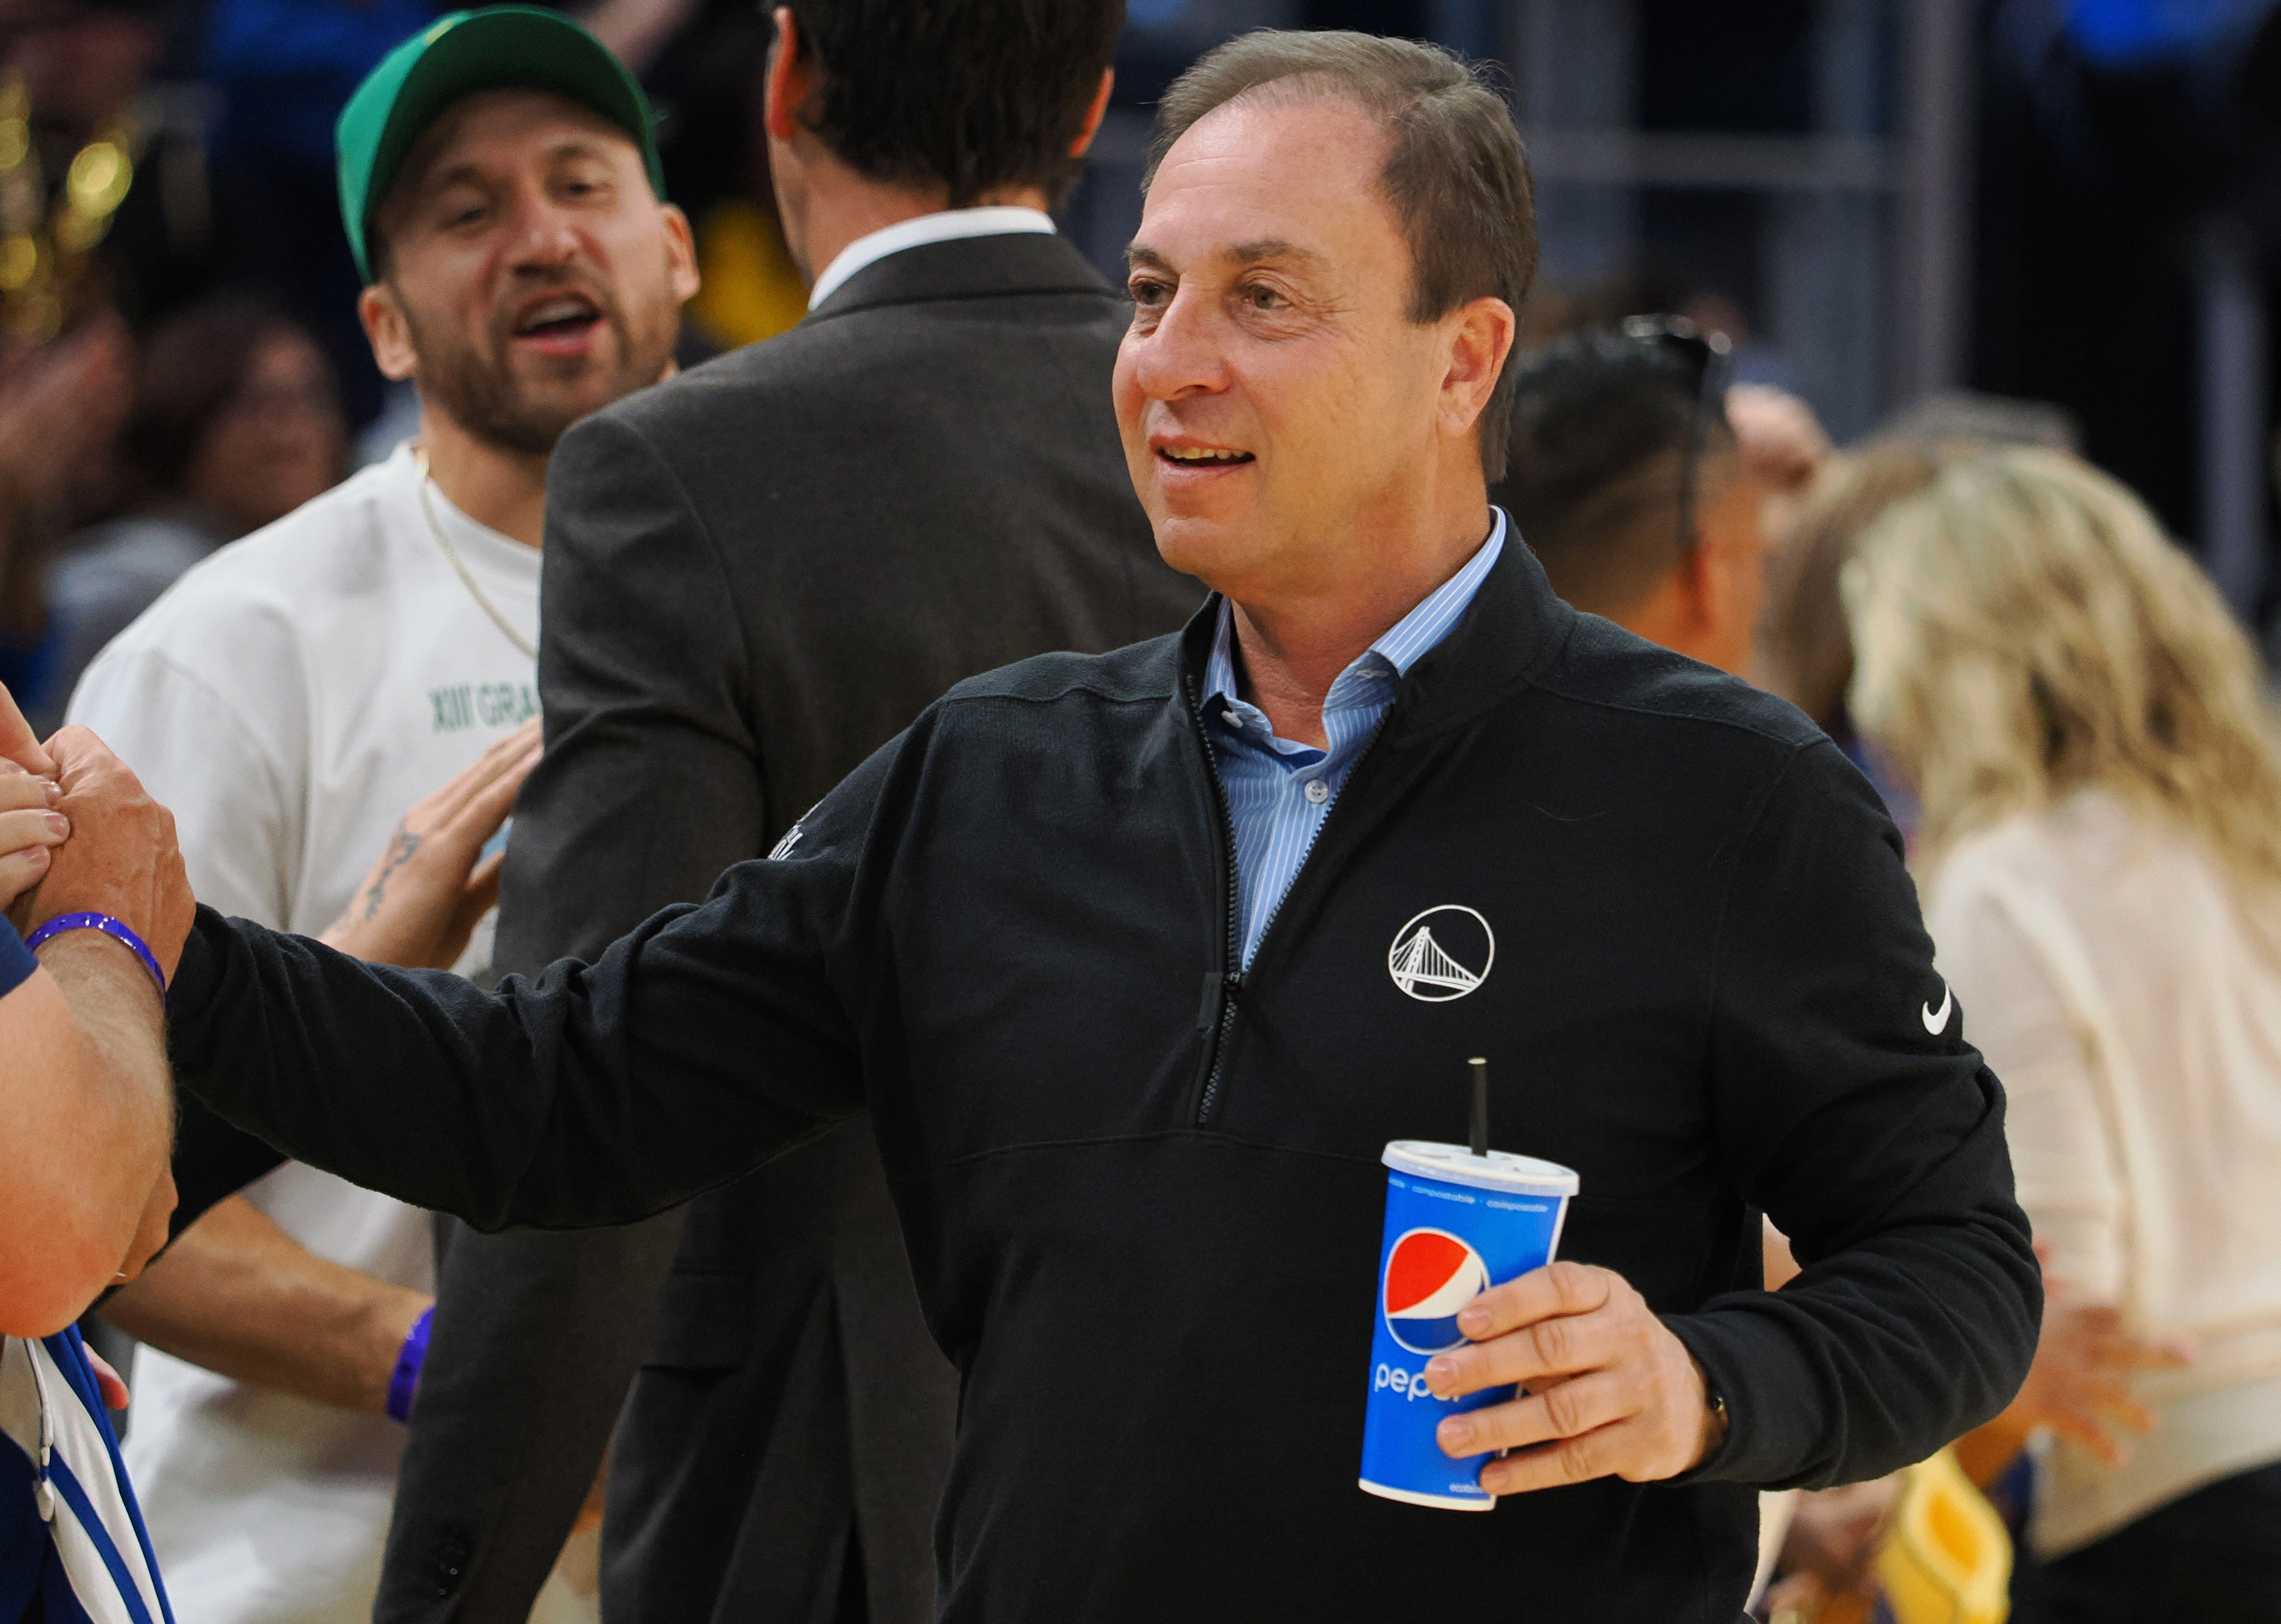 Joe Lacob smiling on the sidelines, holding a drink